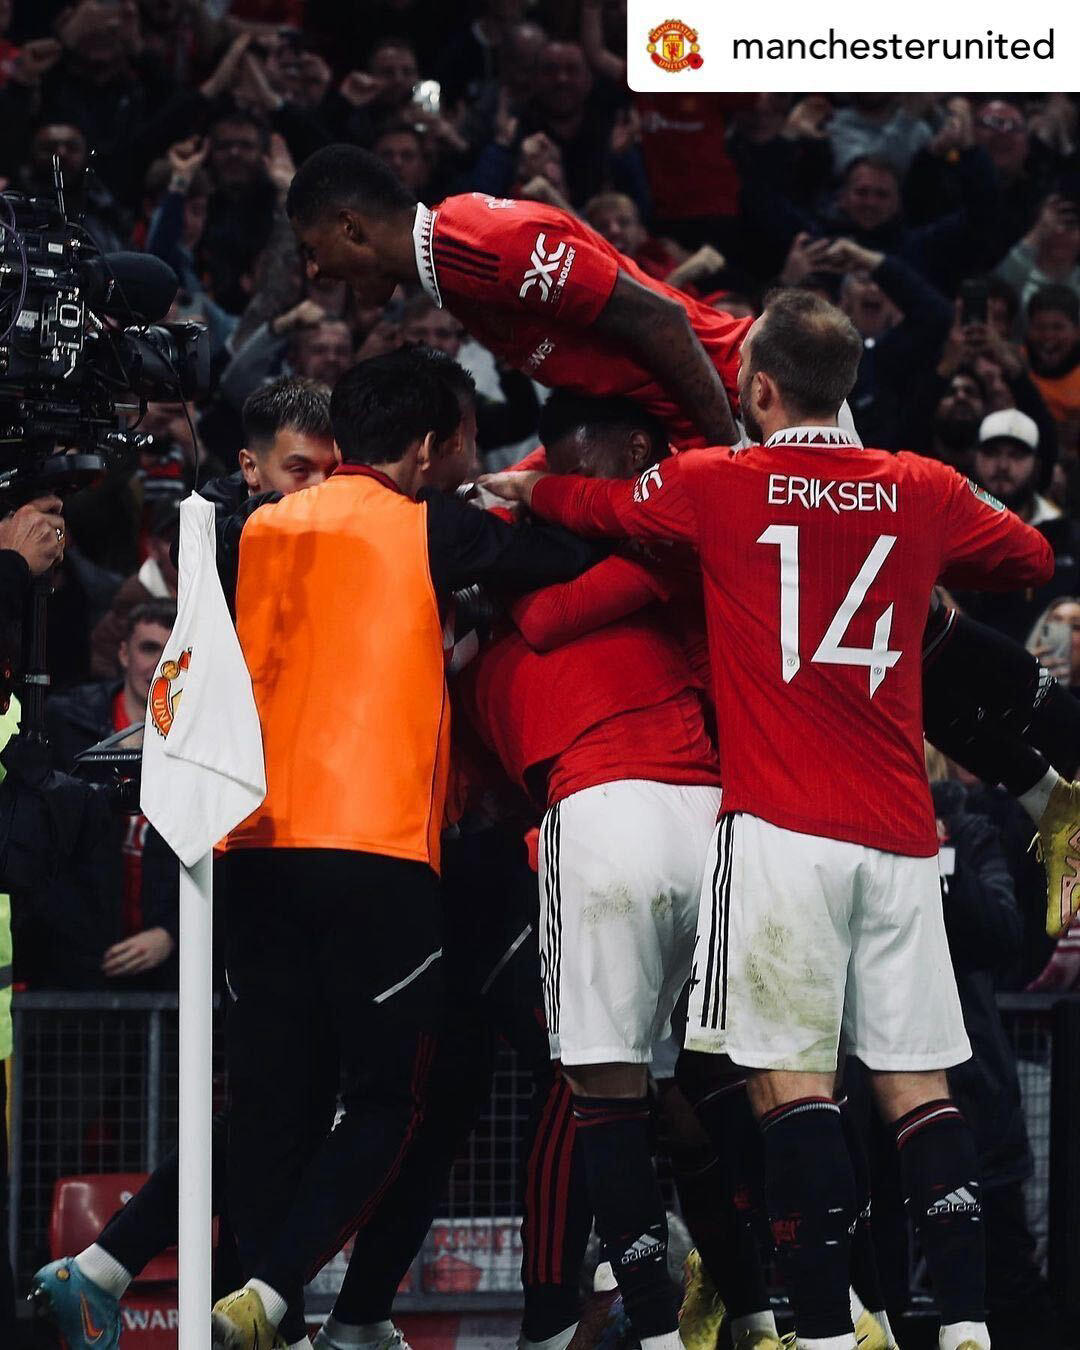 Premier League - Man Utd go into the hat for the Carabao Cup fourth round